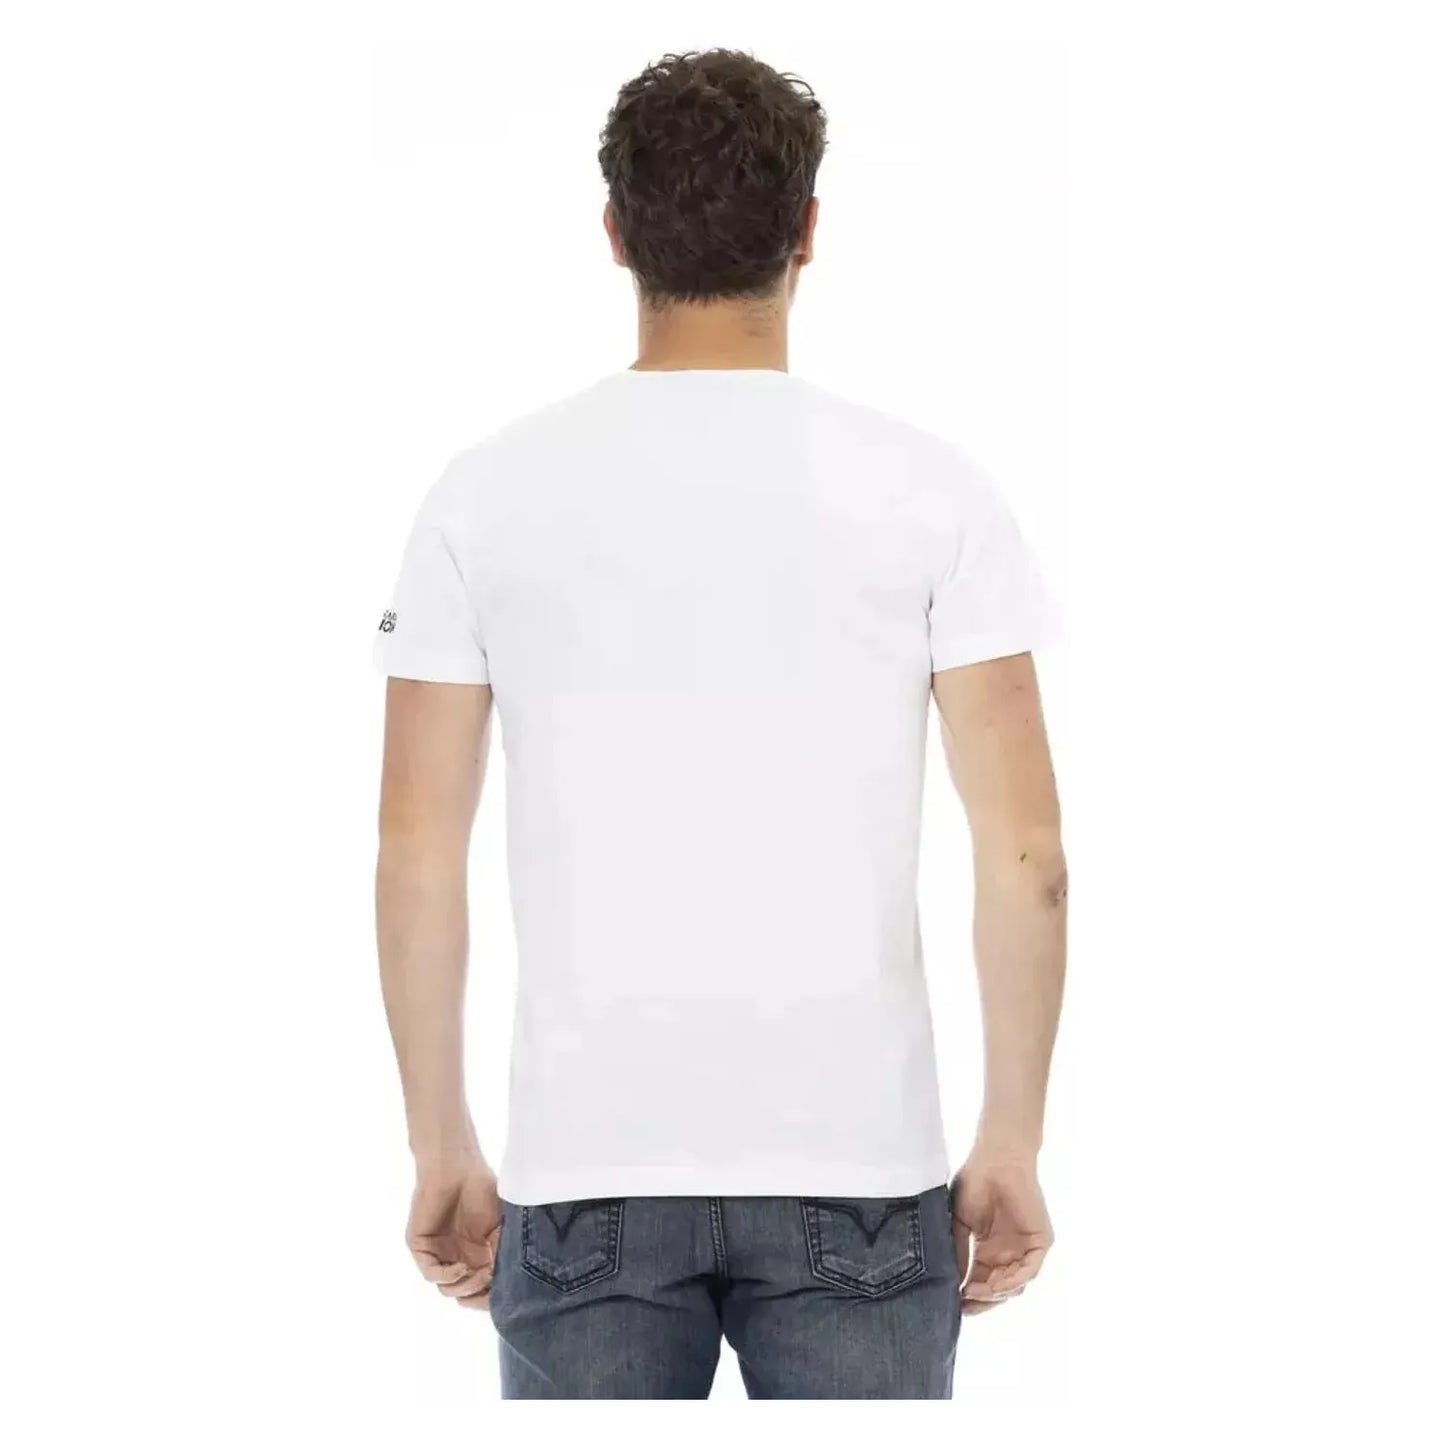 Trussardi Action Elegant White Casual Tee with Front Print white-cotton-t-shirt-115